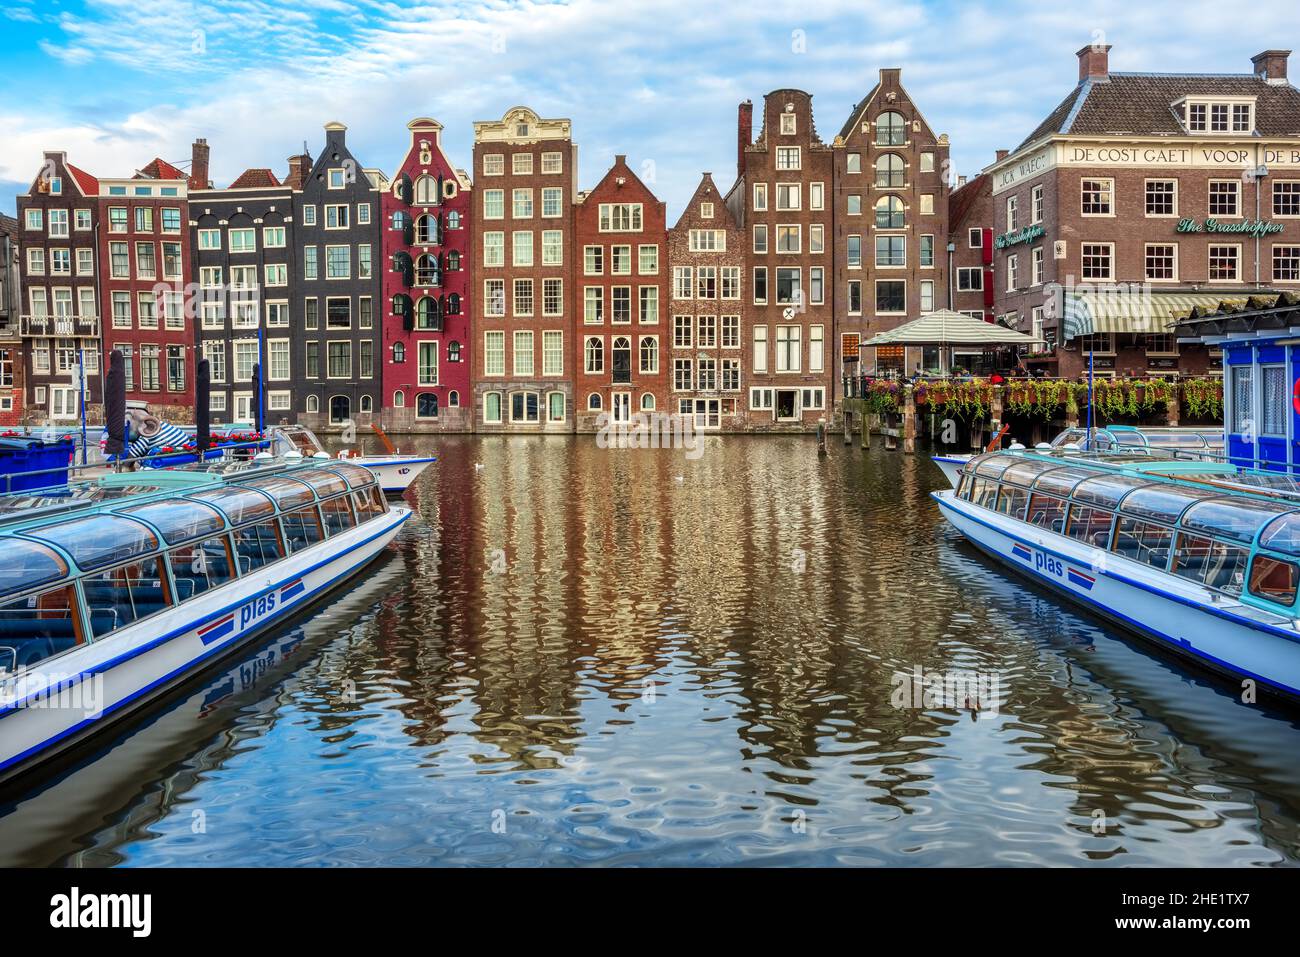 Amsterdam, Netherlands - 14 July 2020: Boats in front of the traditional brick houses on Damrak canal in the Old town of Amsterdam city. Boat trips ar Stock Photo